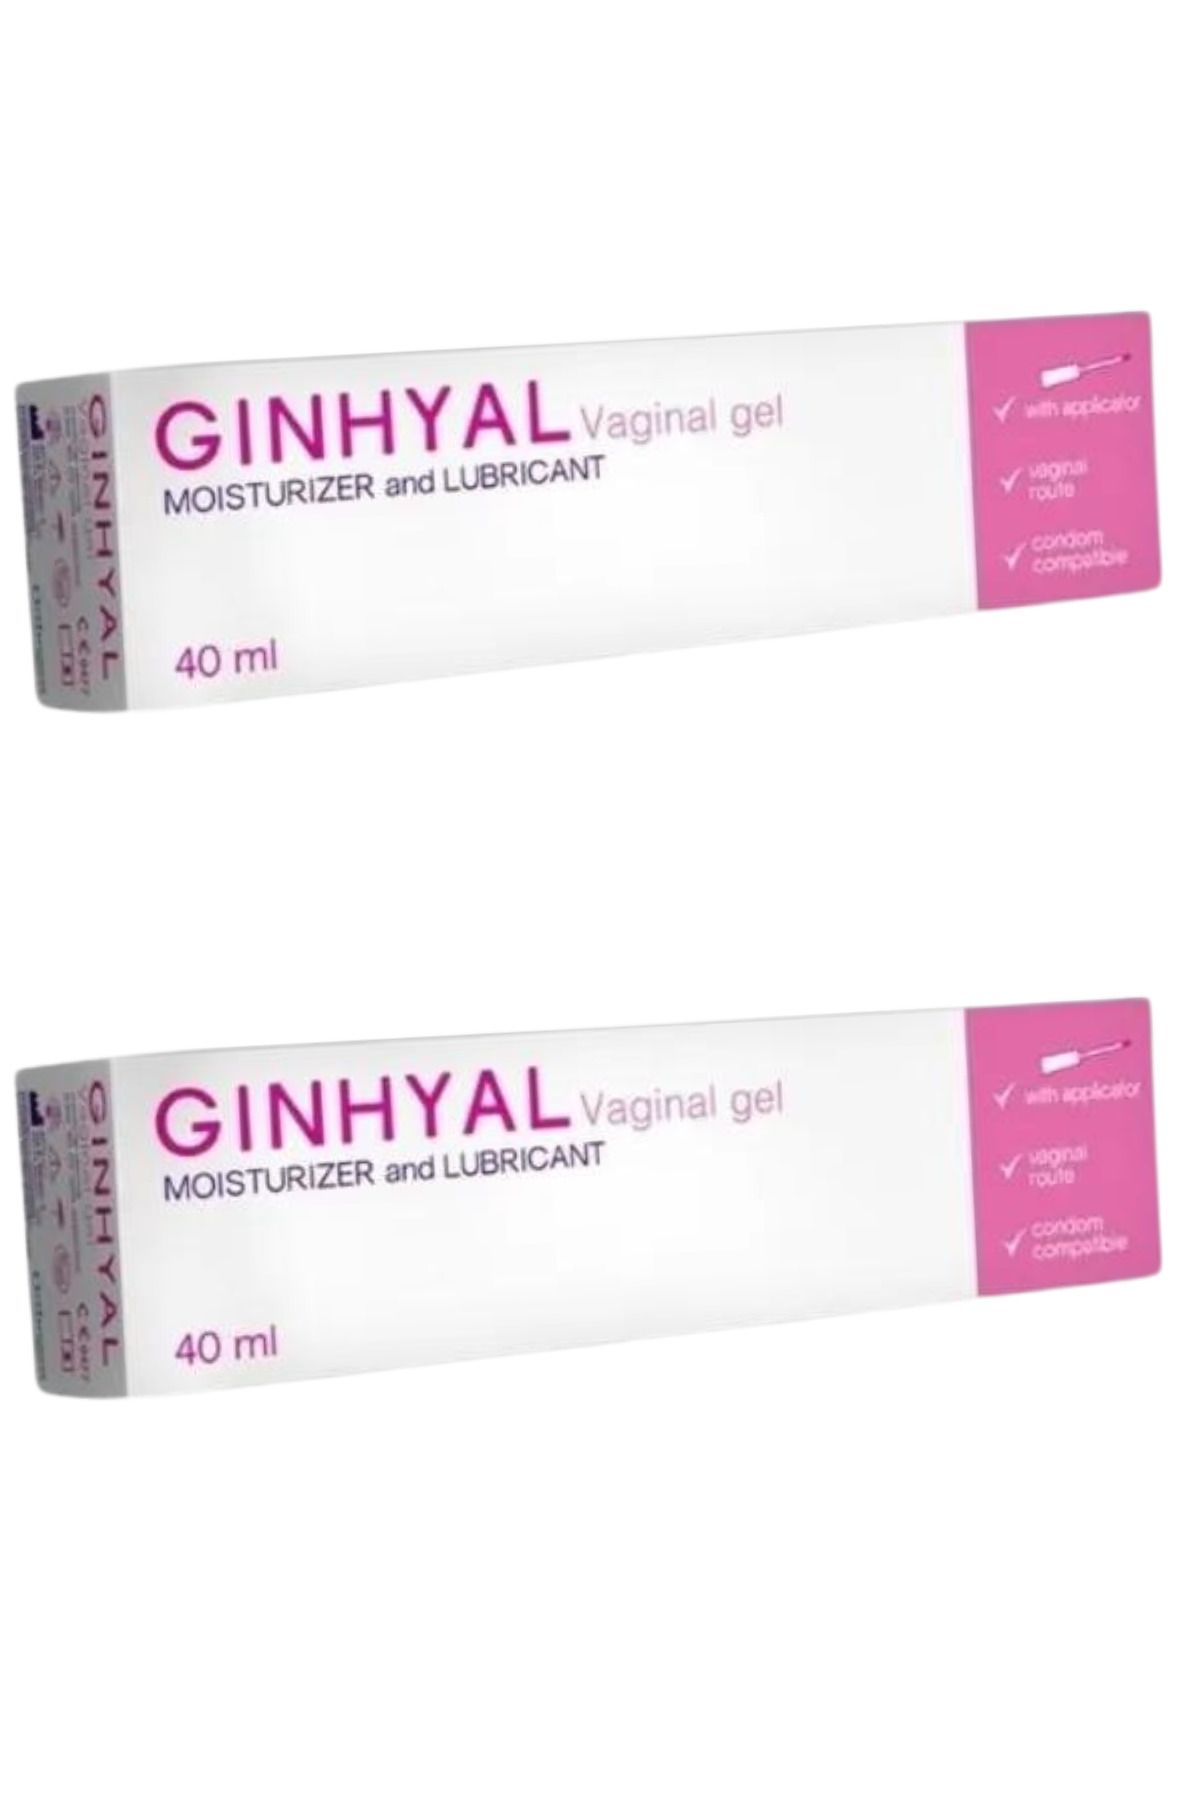 Orthogen Ginhyal Vajinal Jel 40 ml X2 ginhyal